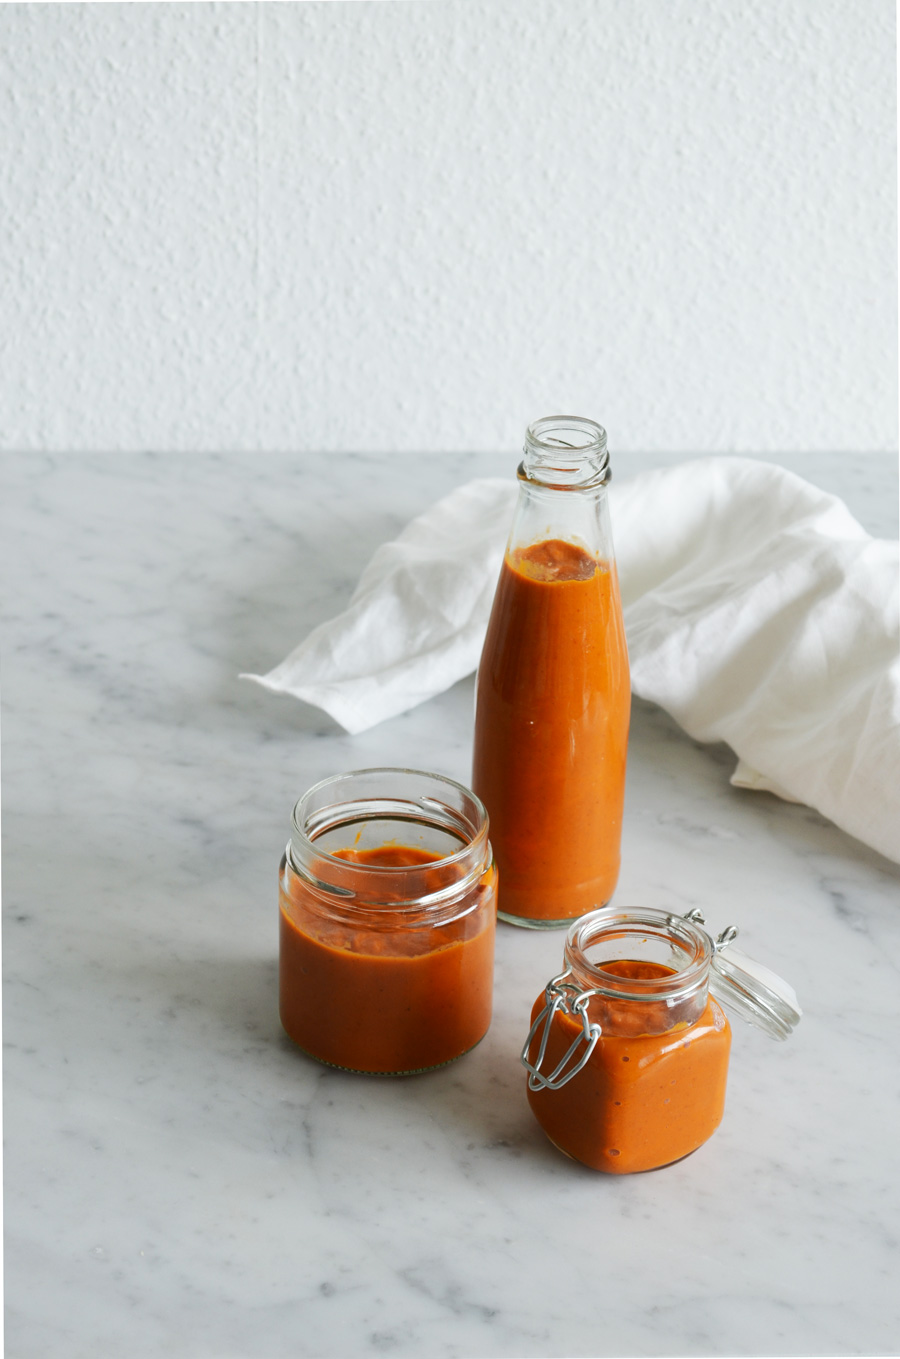 Spicy sugar free, vegan, gluten free, roasted red pepper ketchup, with no sugar or salt added